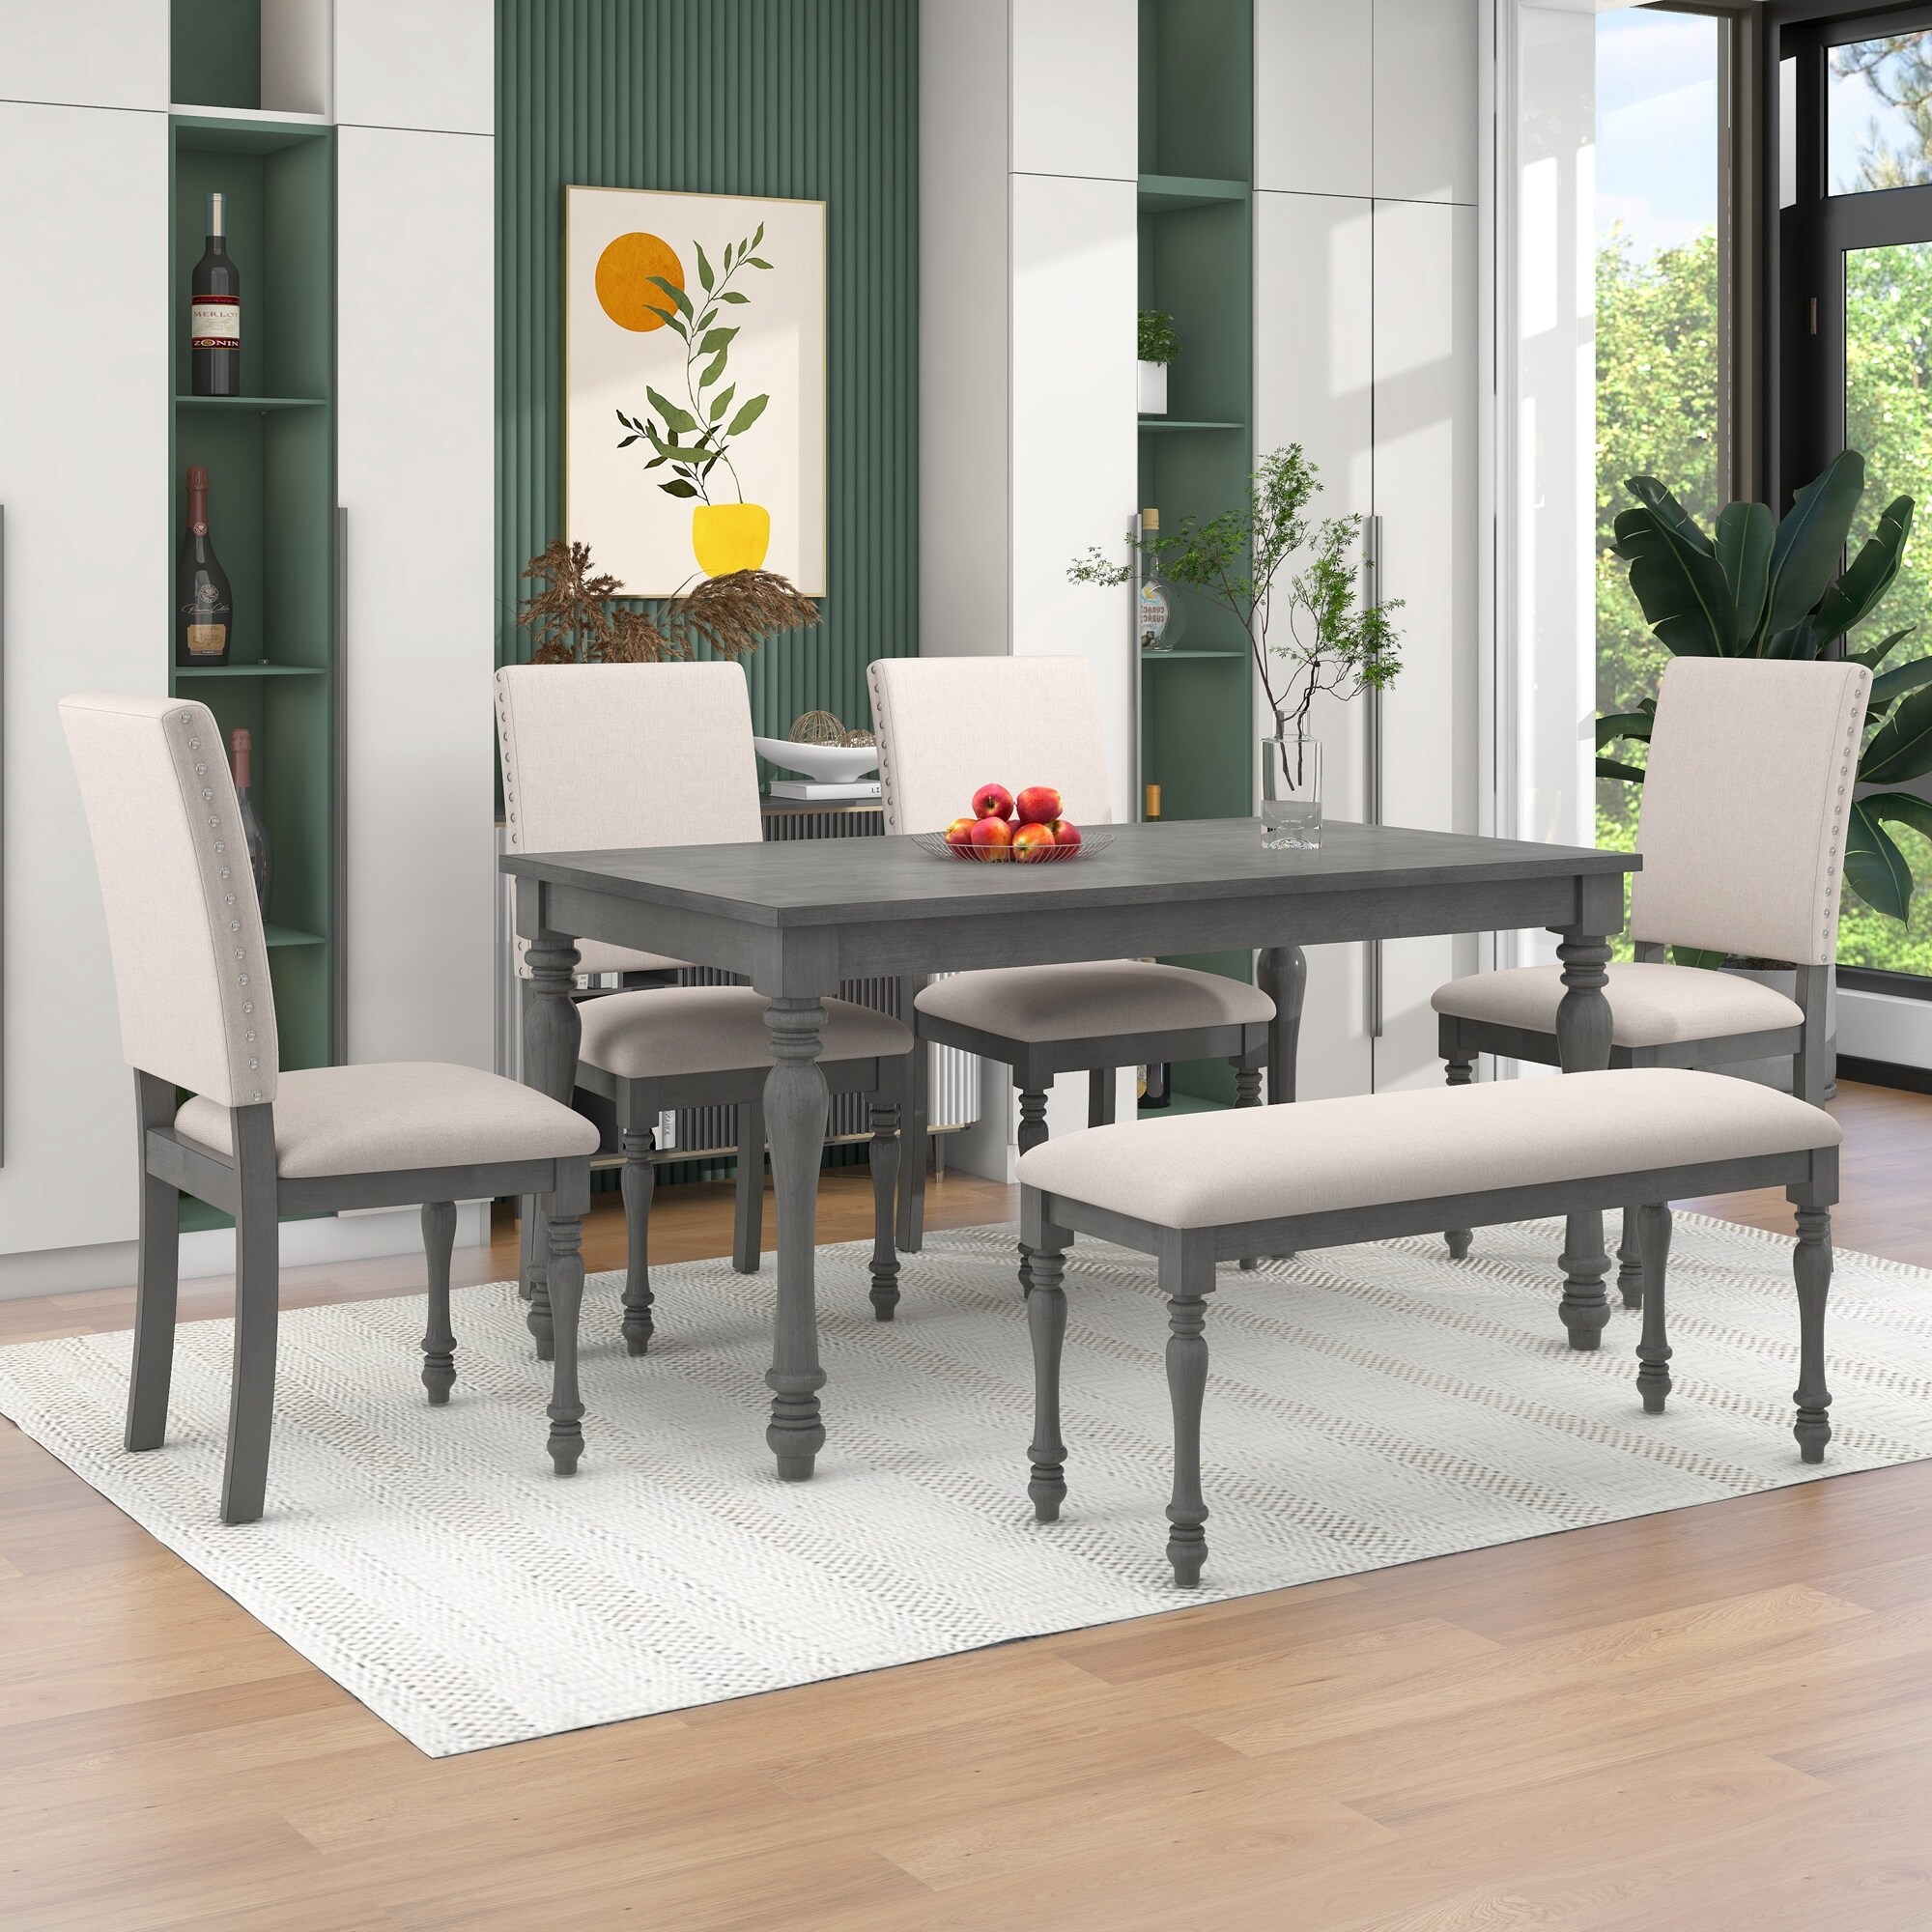 6-piece Wood Dining Table Set With Turned Legs  Upholstered Chairs